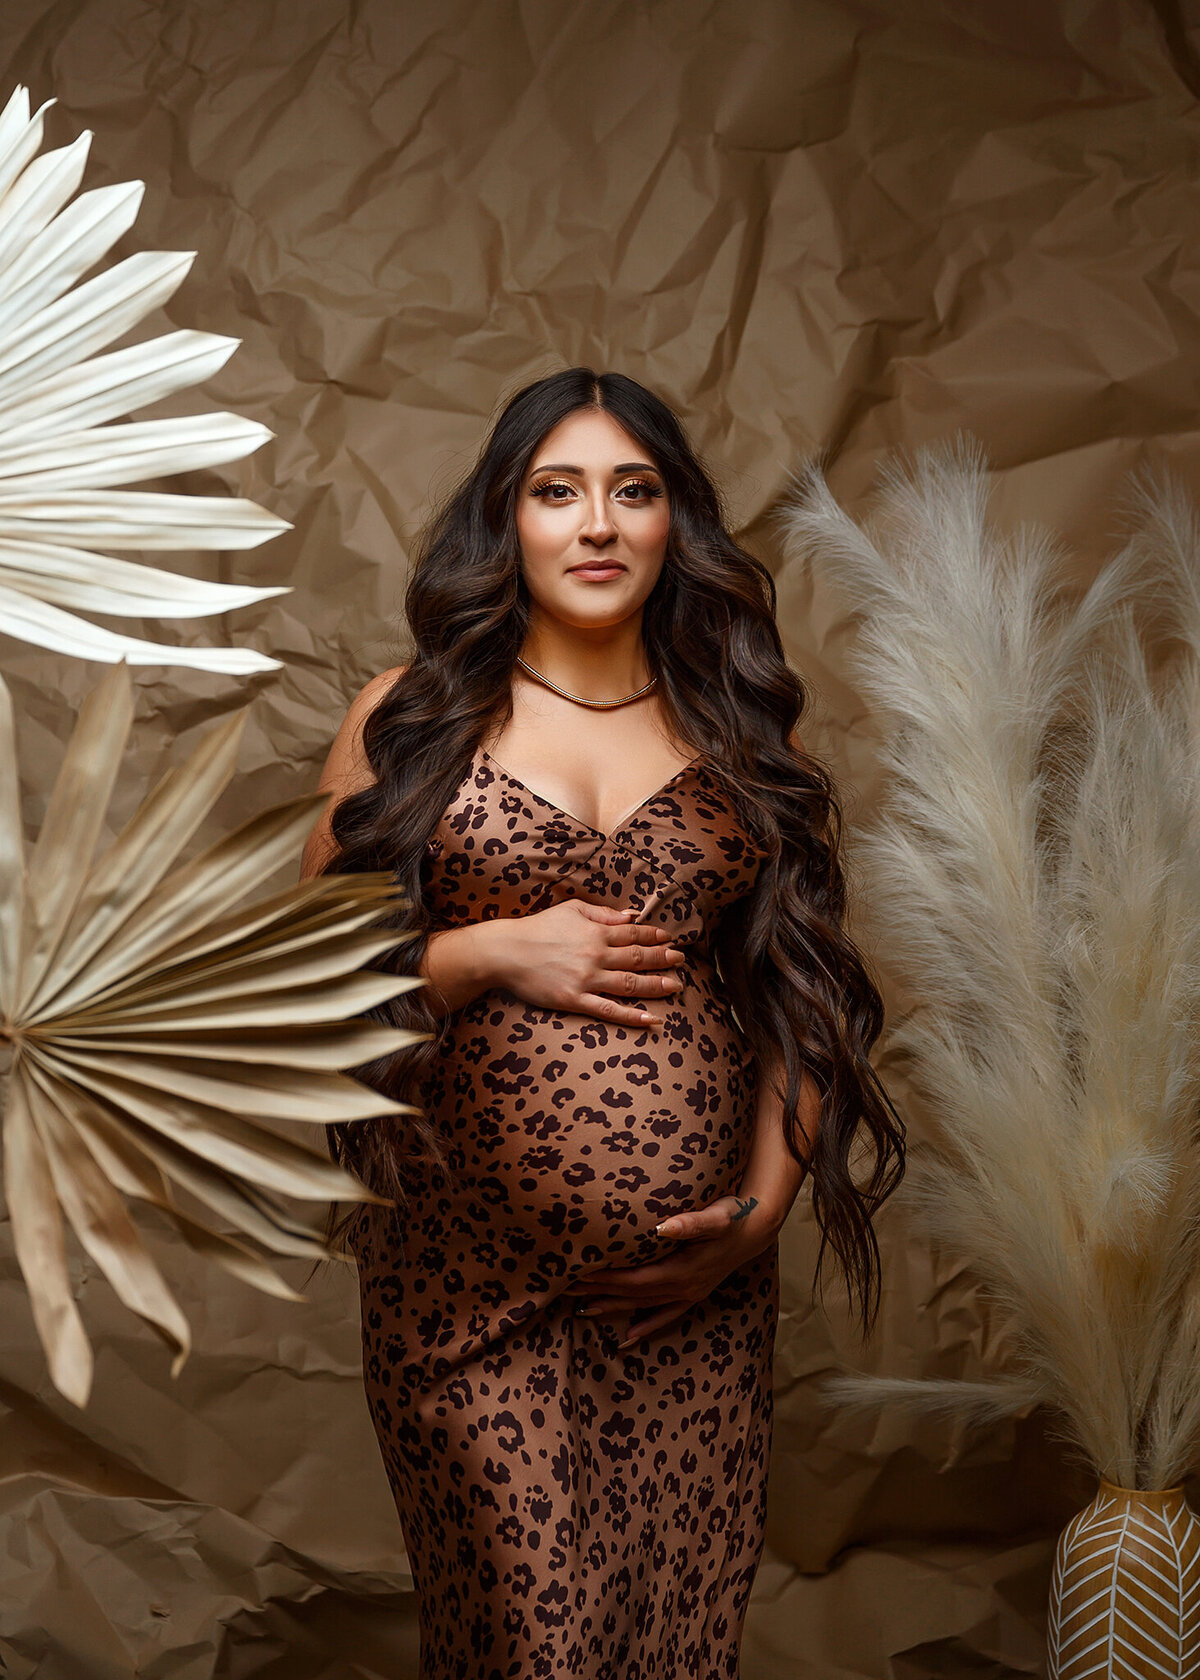 Gorgeous pregnant mom in a  cheetah print dress against brown crinkled paper background with dried palm leaves and pampas grass around her